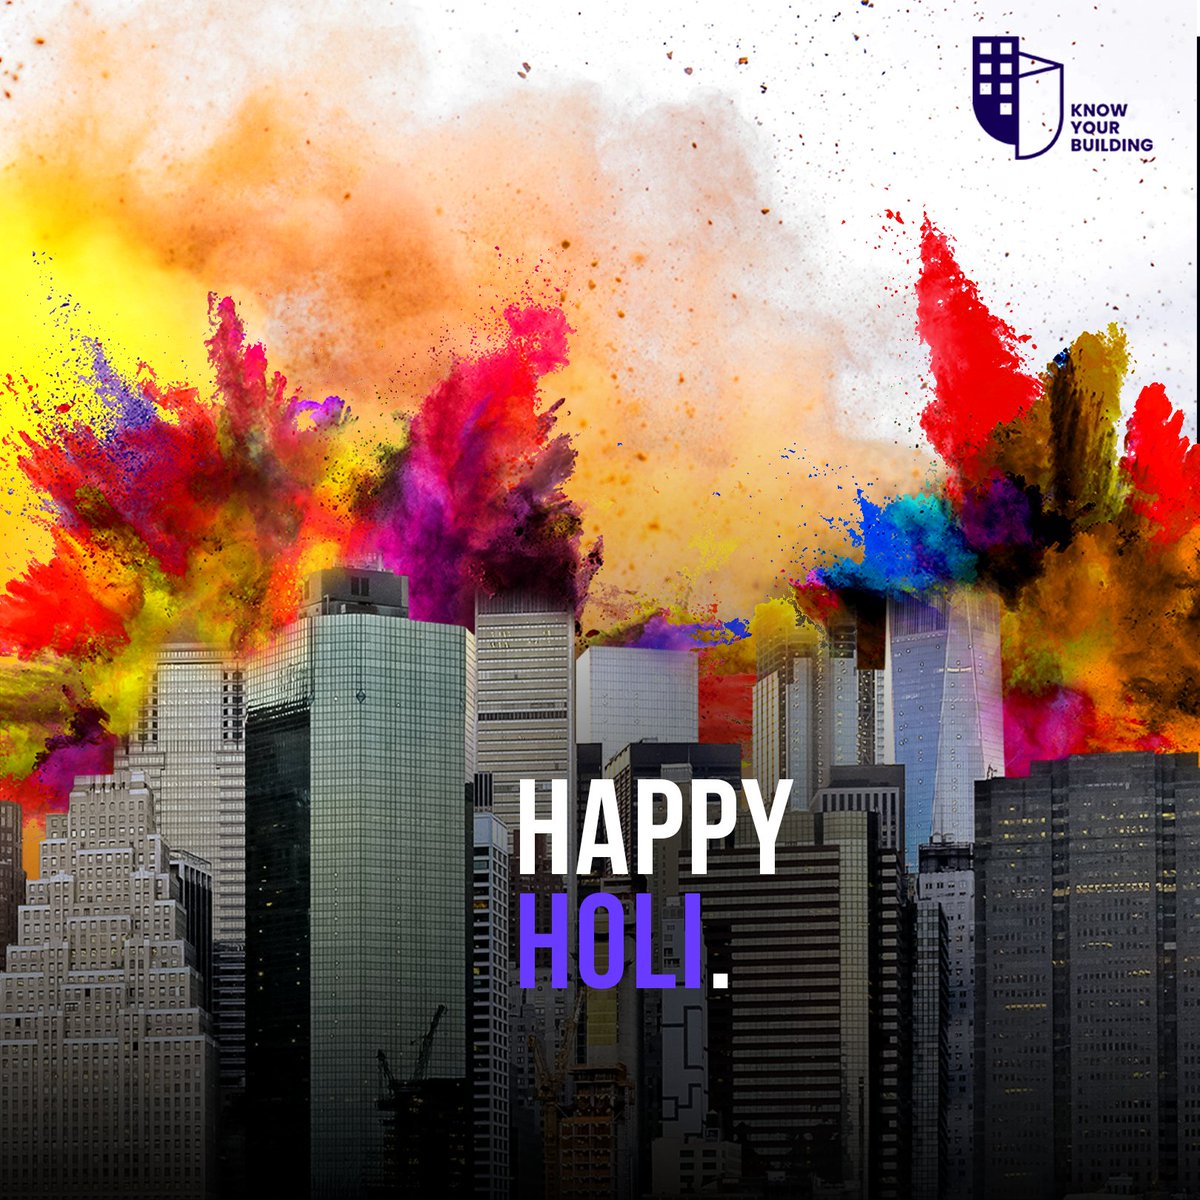 #HappyHoli to everyone! 

May this #festivalofcolors fill your life with #happiness, positivity and new beginnings. Let the vibrant hues of #Holi brighten up your day and create unforgettable memories with your loved ones.

#KnowYourBuilding #Holi2023  #celebrations #Wirelessbms